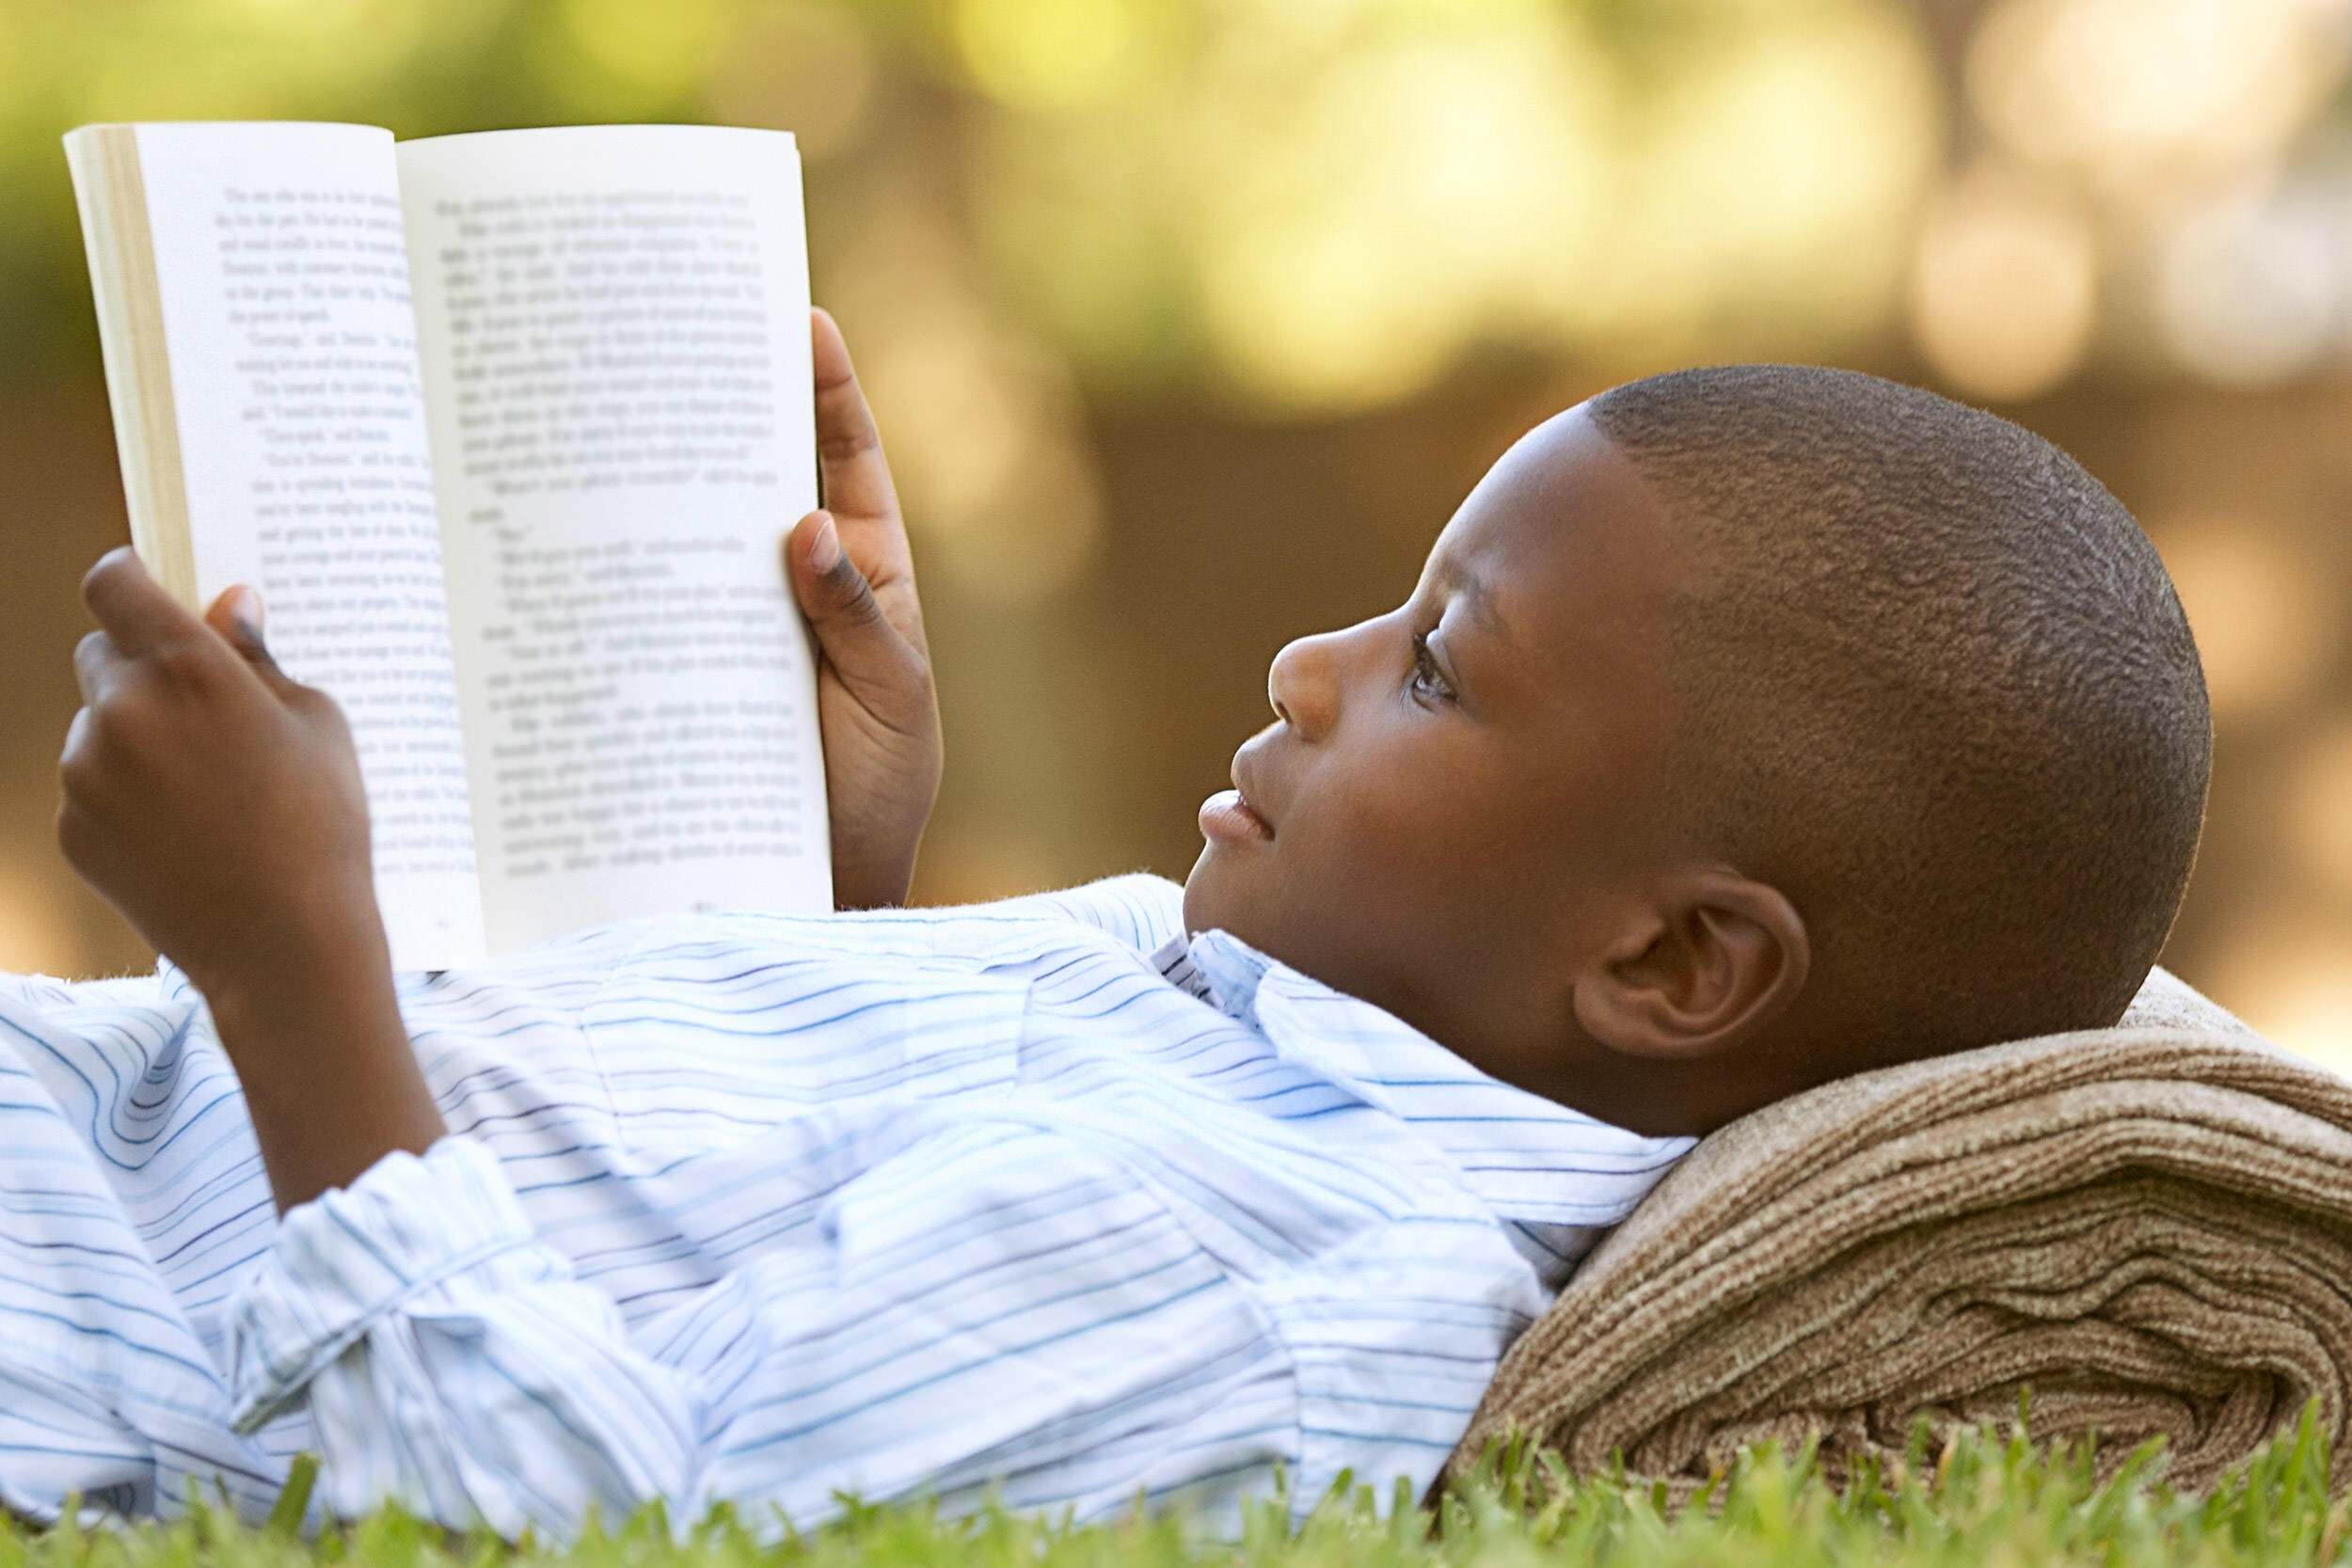 kids age group - boy reading a book outside in summer